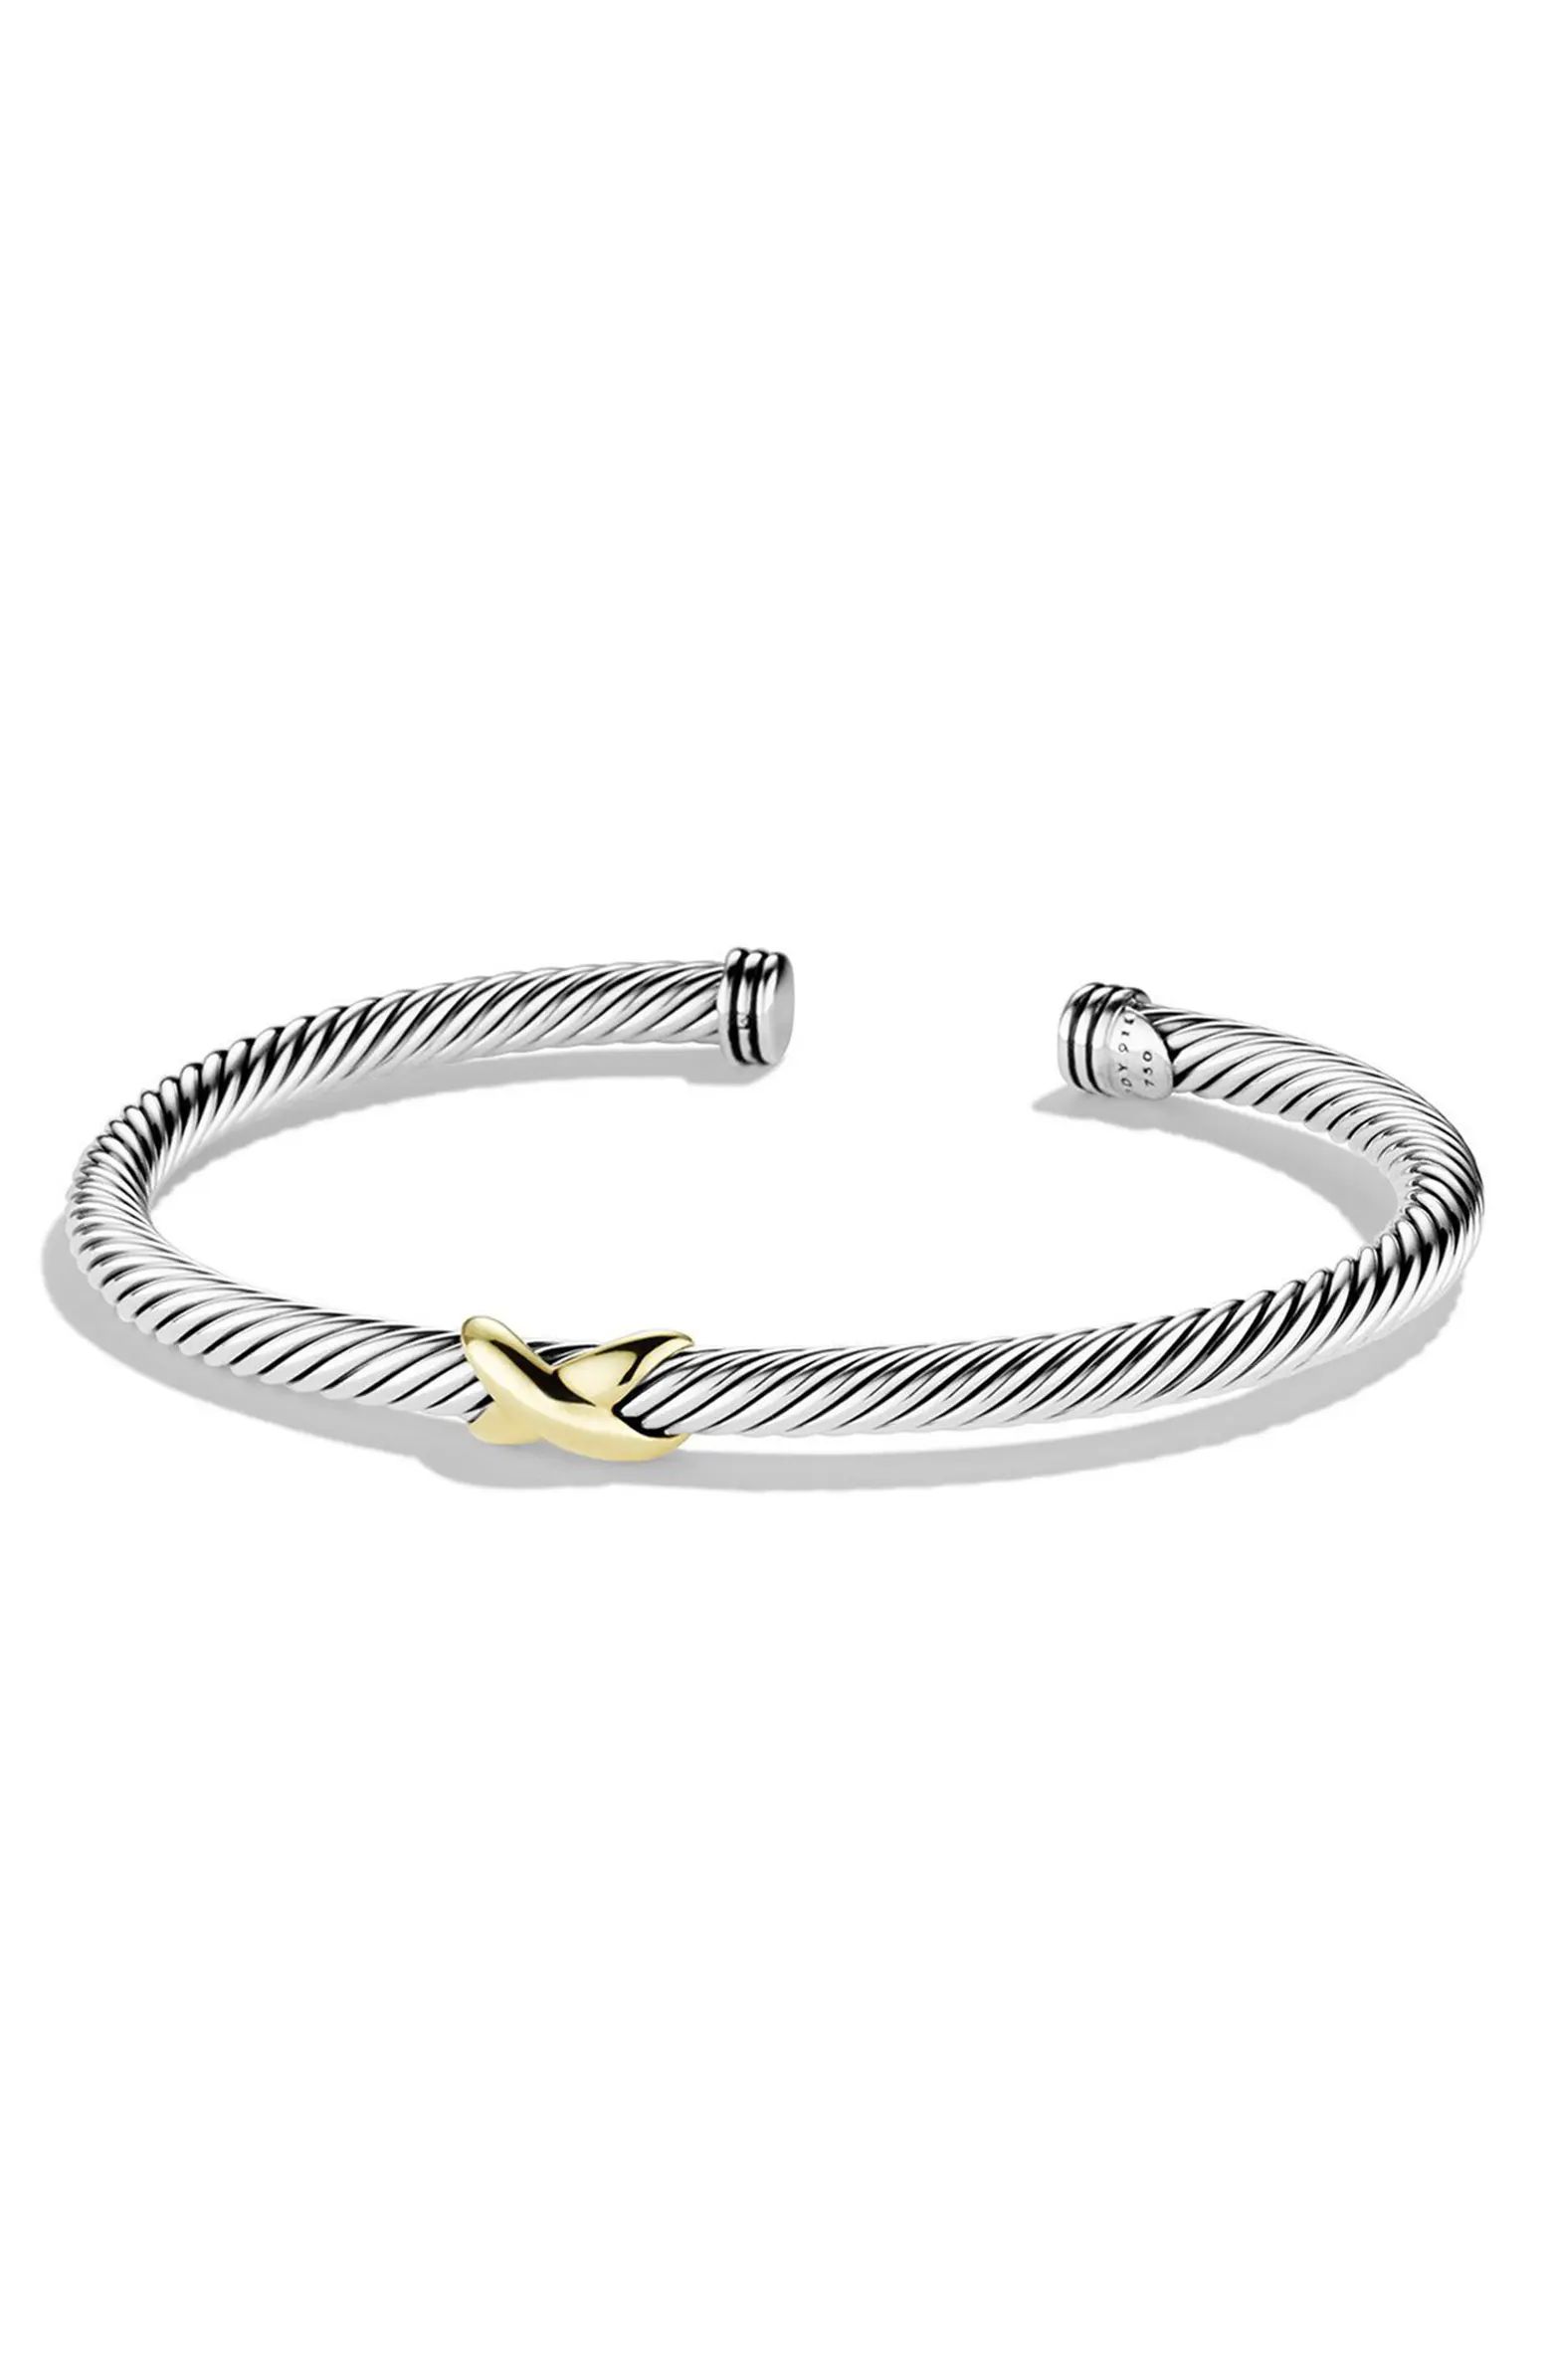 X Classic Cable Station Bracelet in Sterling Silver with 14K Gold, 4mm | Nordstrom